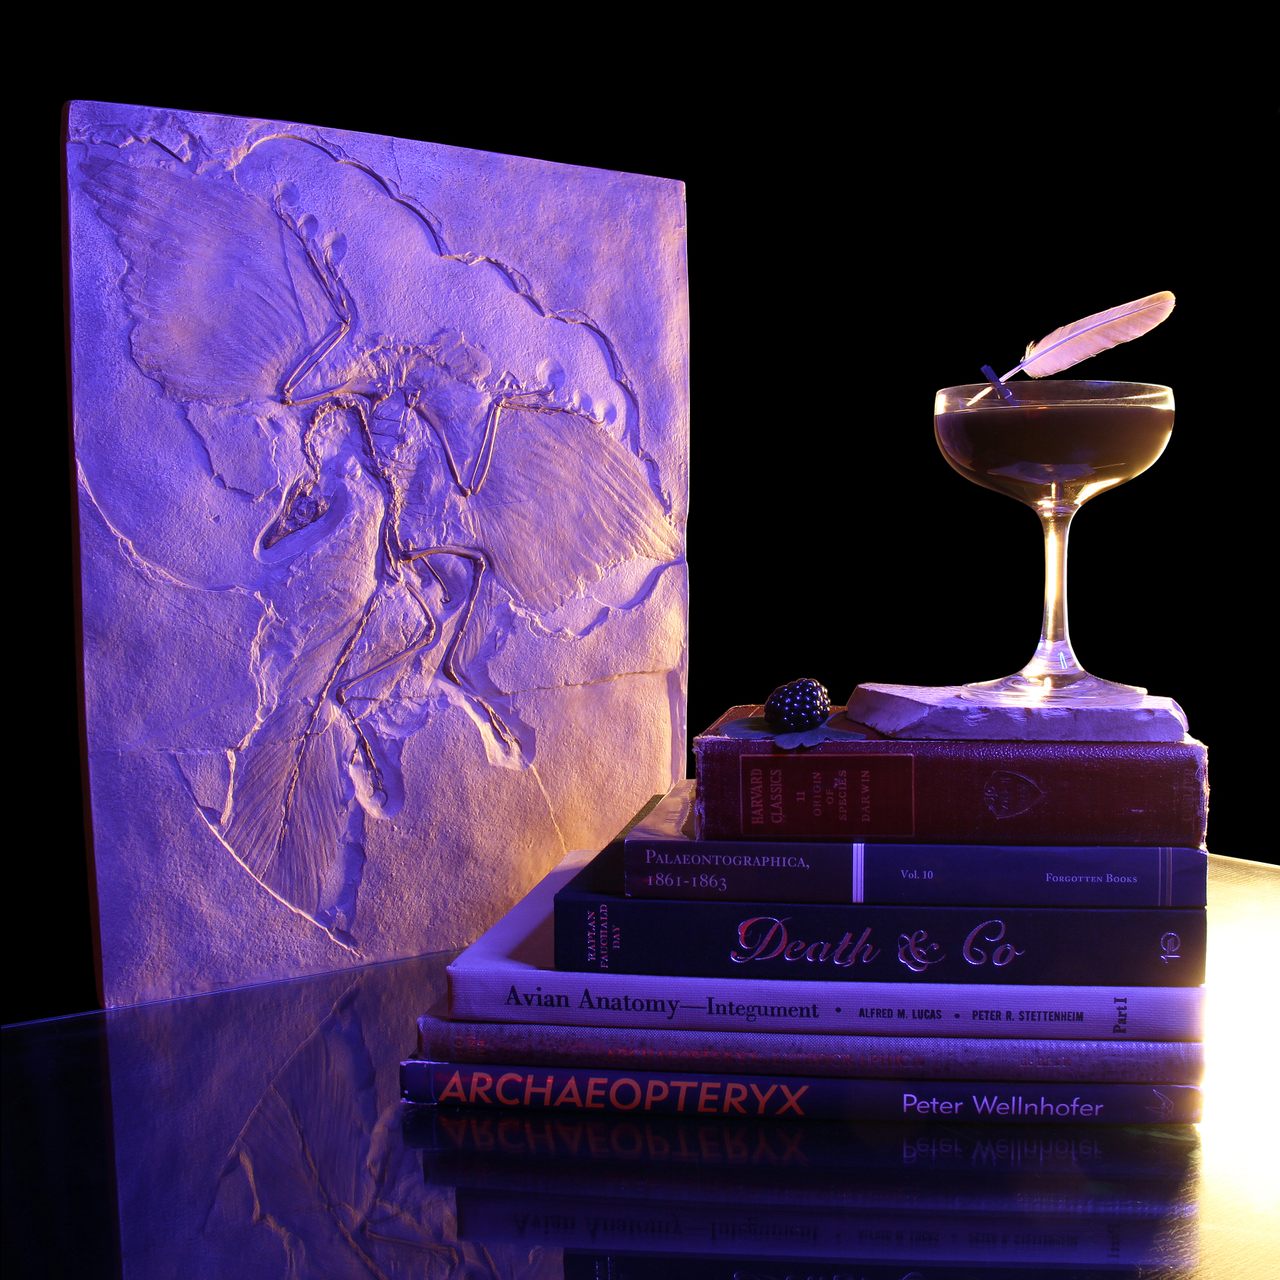 The <em>Archaeopteryx</em> cocktail, which Carney concocted the day his paper was published, is pictured here with a replica of the Berlin specimen.